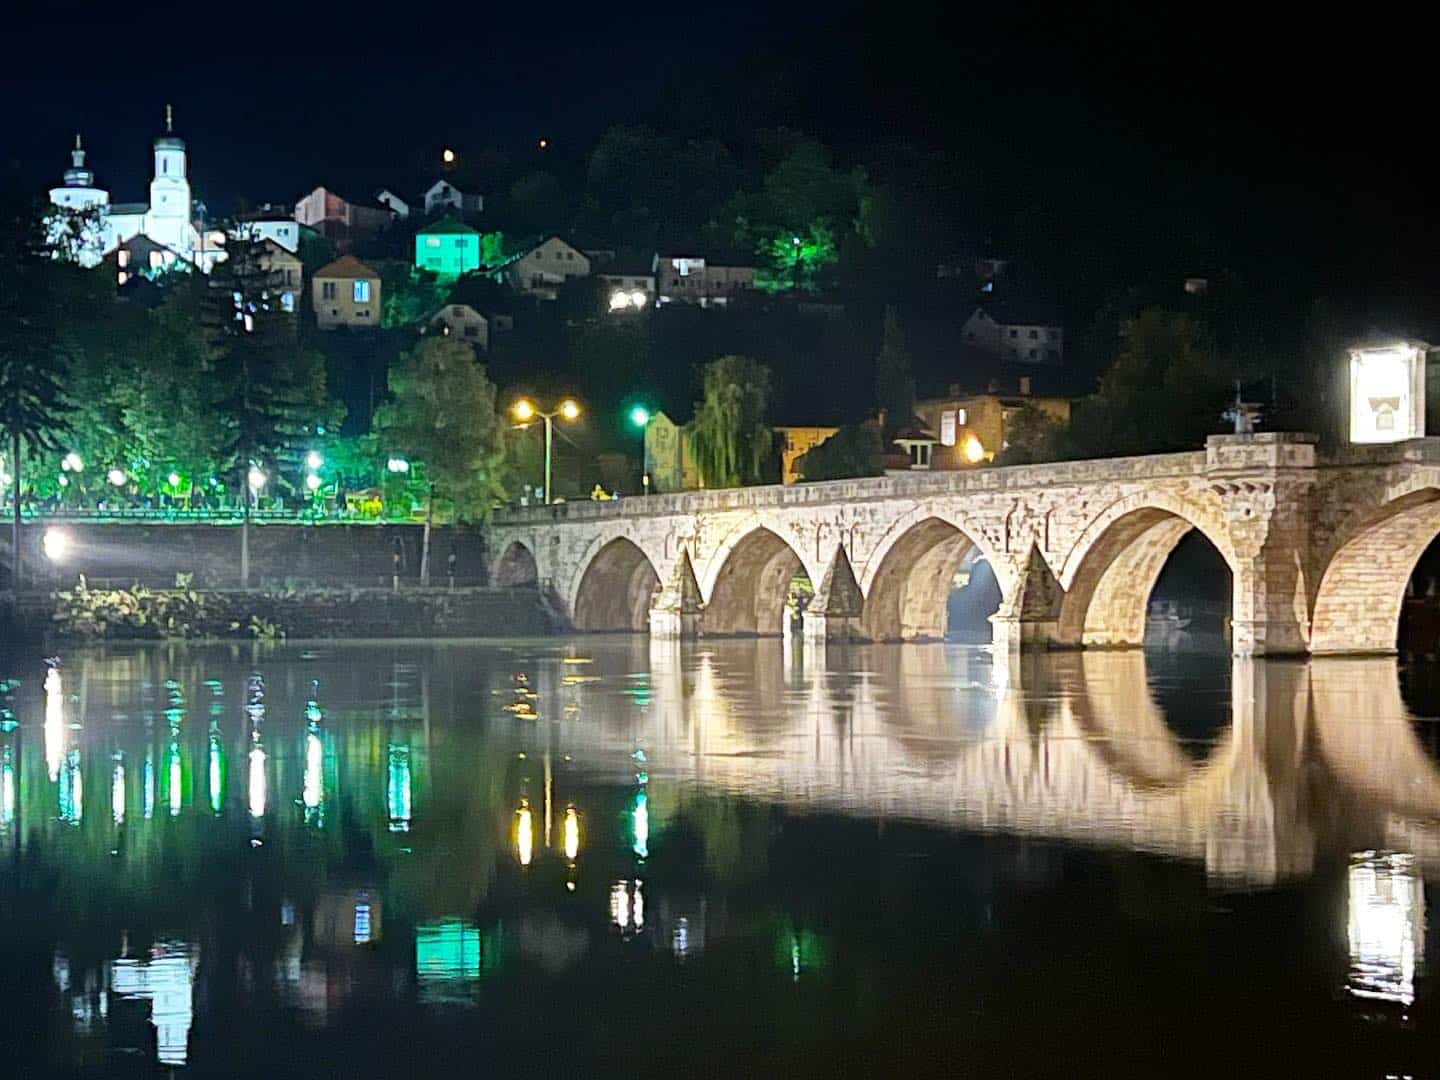 famous #tourist #attractions can be boring … this one is just amazing the #bridge over #drina #river in #višegrad #travel #tourism #bosnia #unesco #nightphotography #shotoniphone #nofilter #iphone13pro